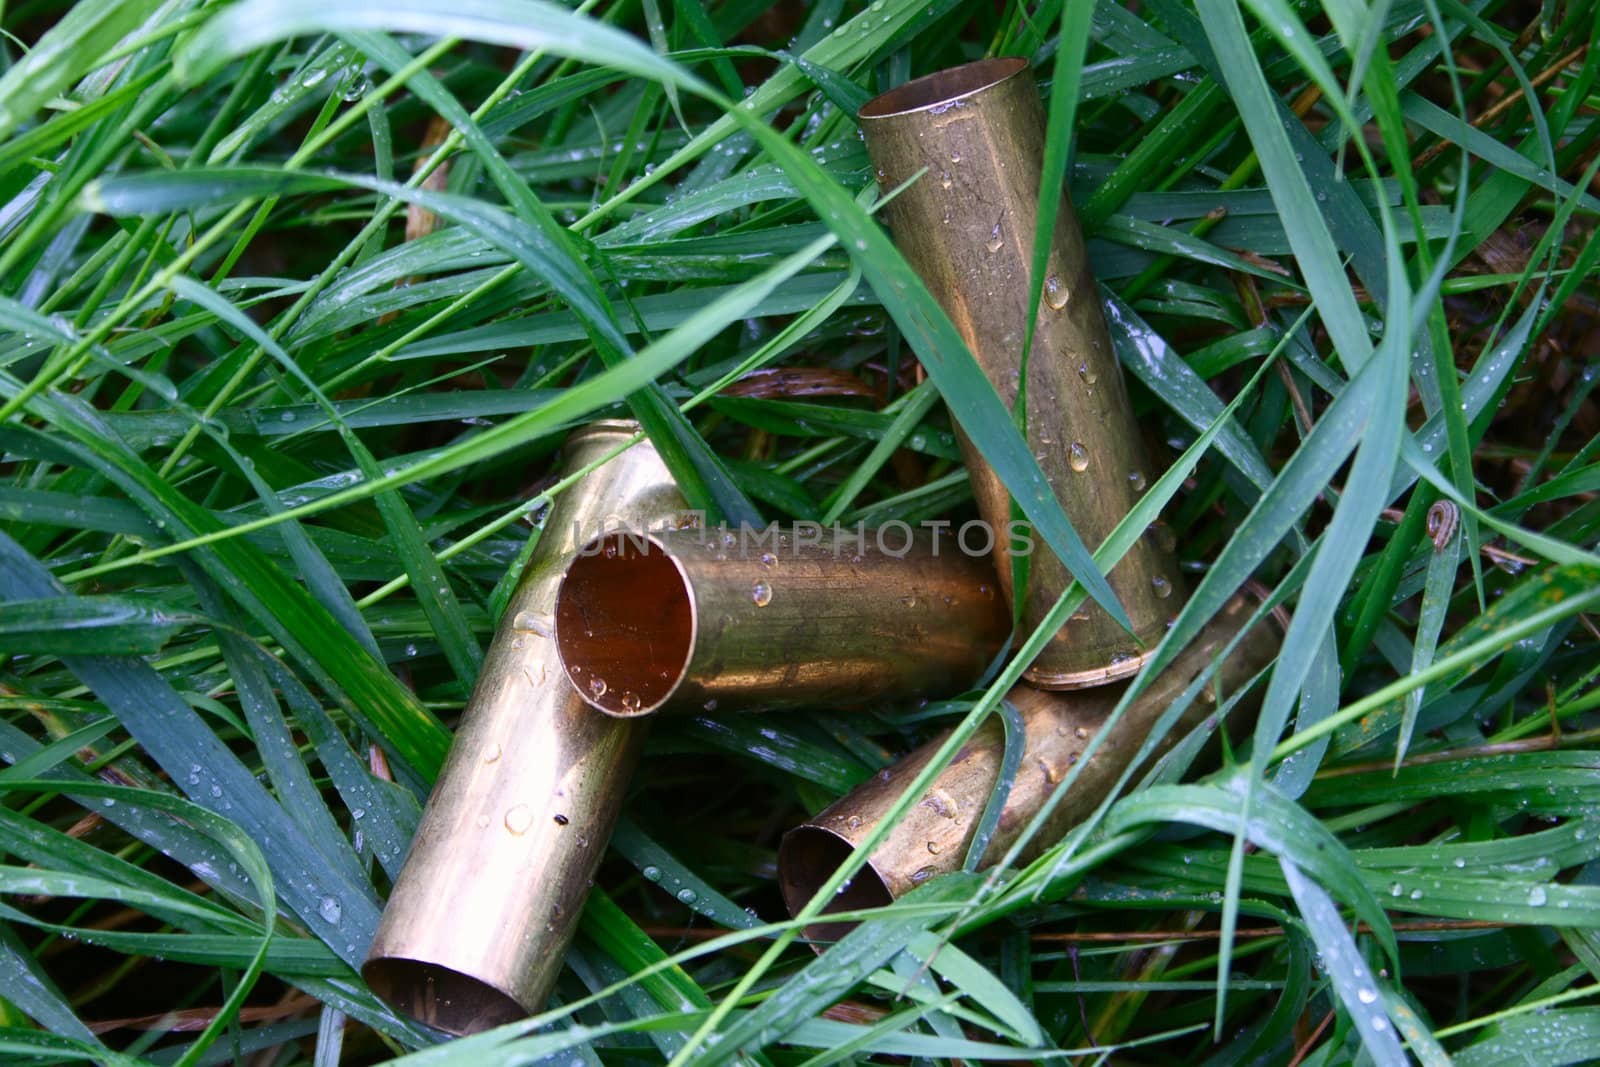 Sleeves from the hunting cartridges in a grass the covered dew